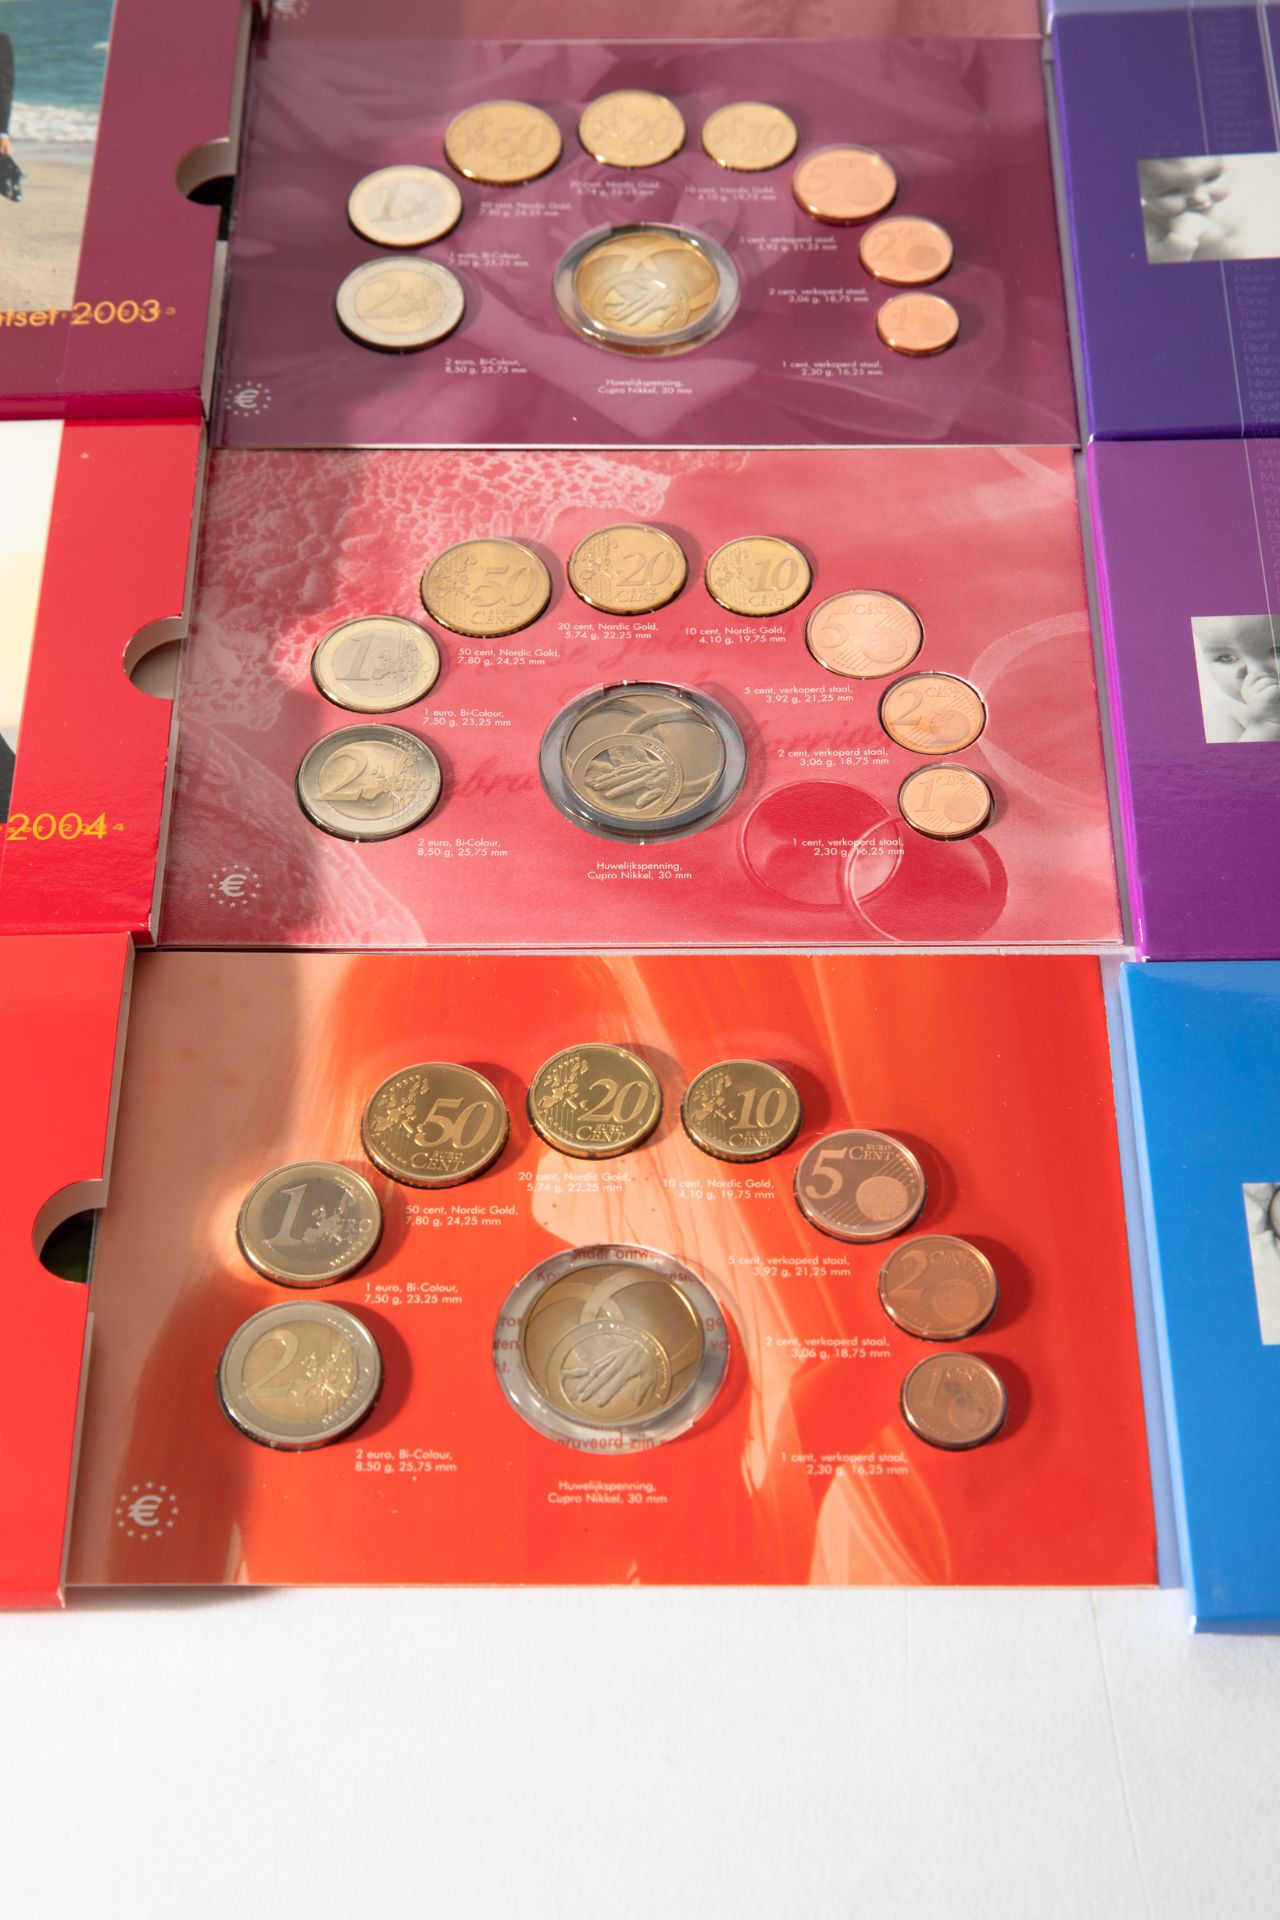 14x Netherlands Euro Coin Sets - Image 8 of 10